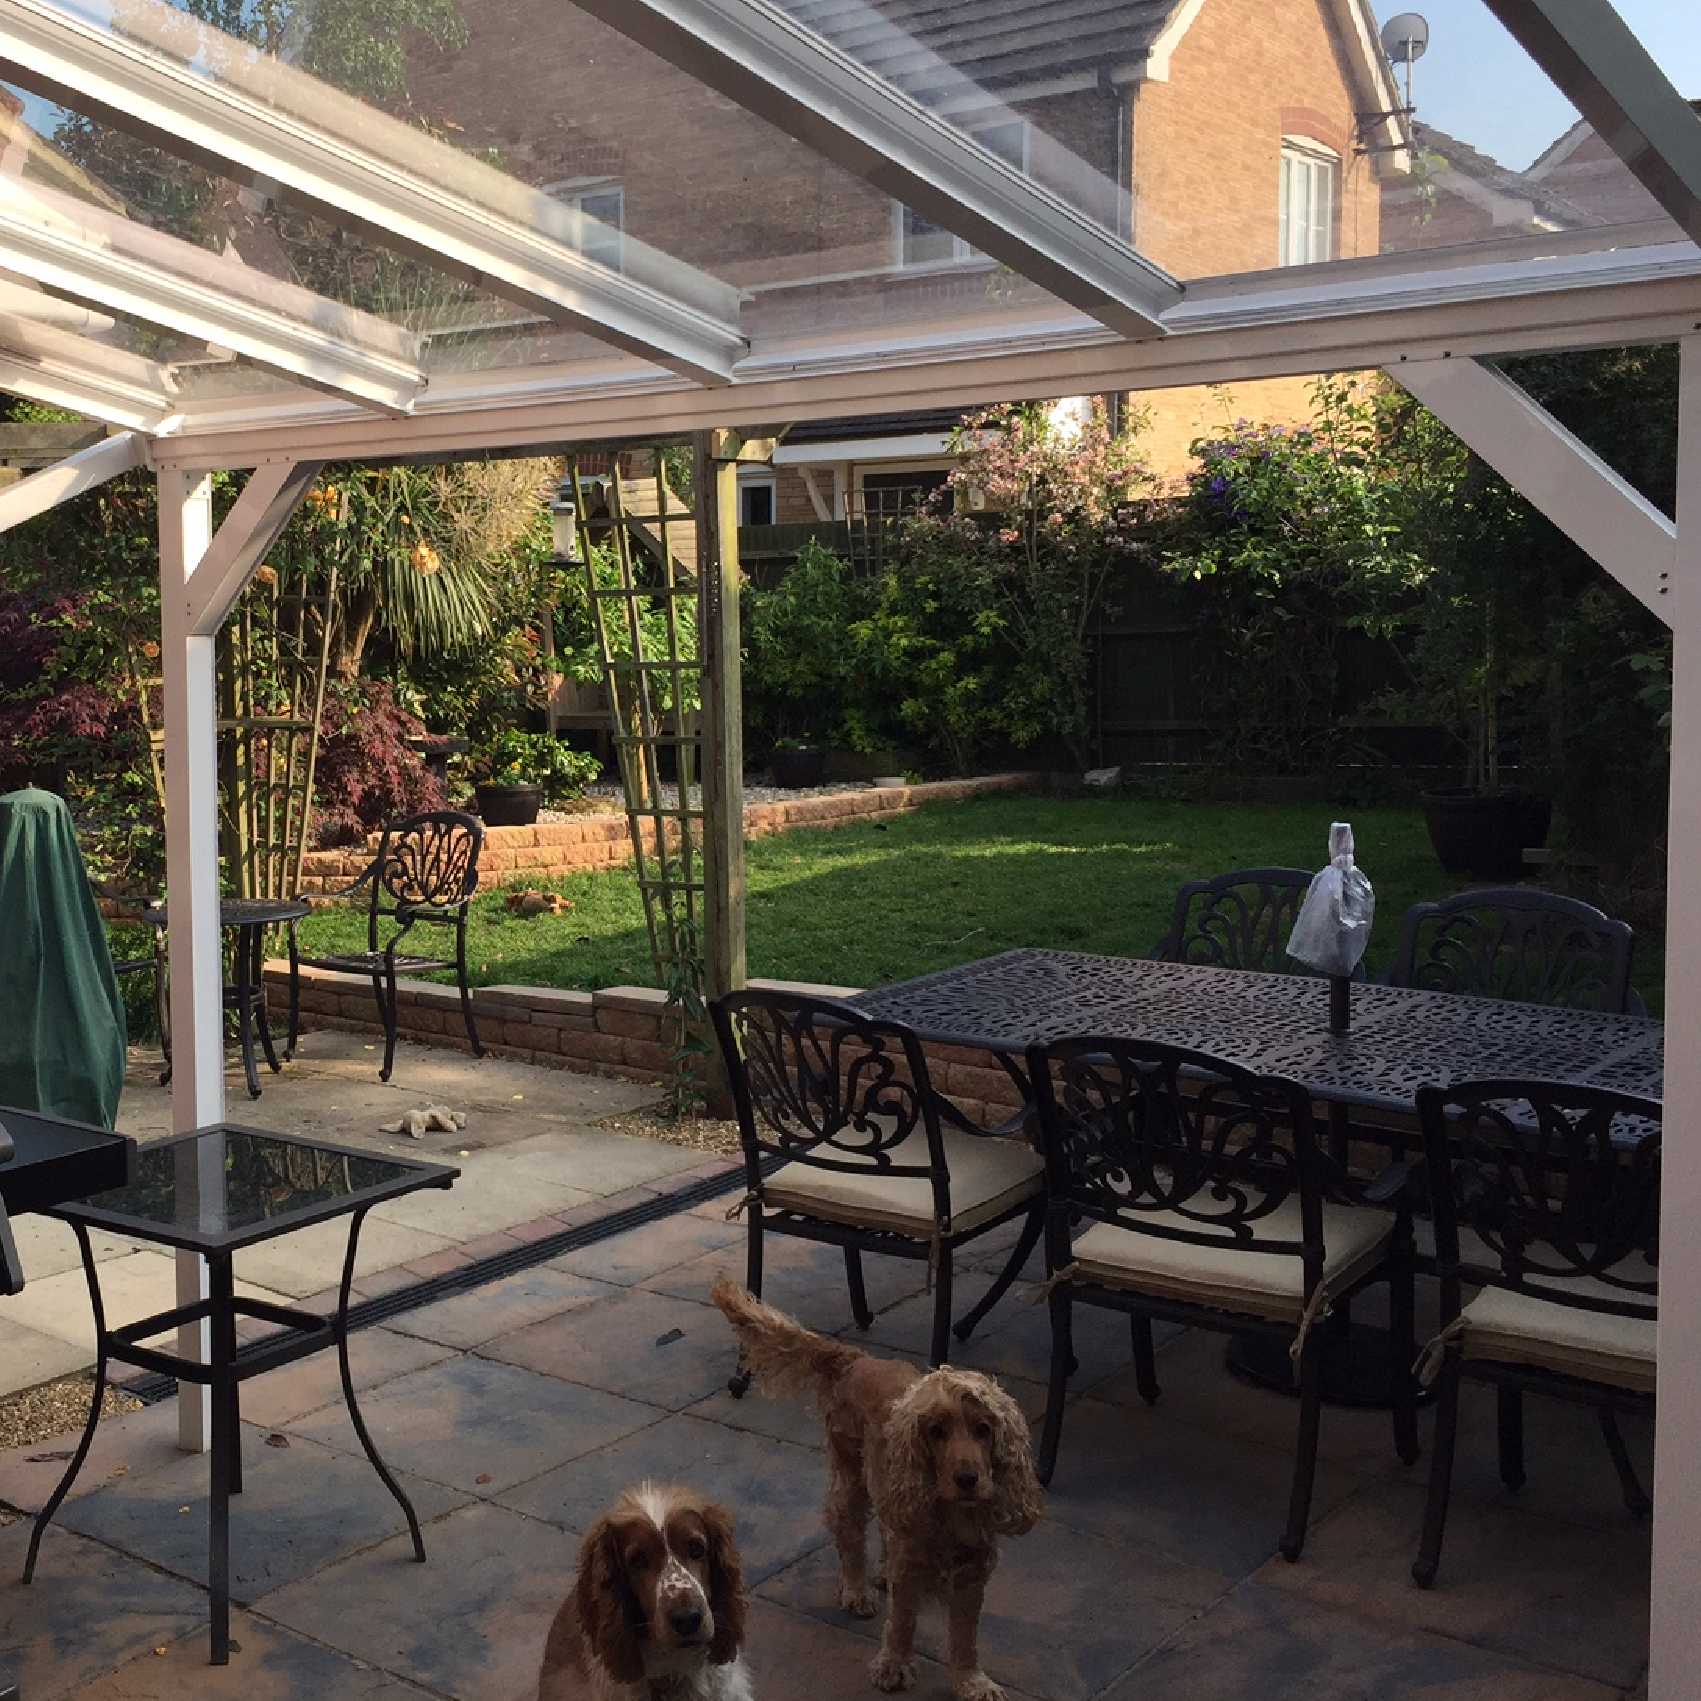 Affordable Omega Smart Lean-To Canopy, White UNGLAZED for 6mm Glazing - 8.4m (W) x 2.0m (P), (4) Supporting Posts